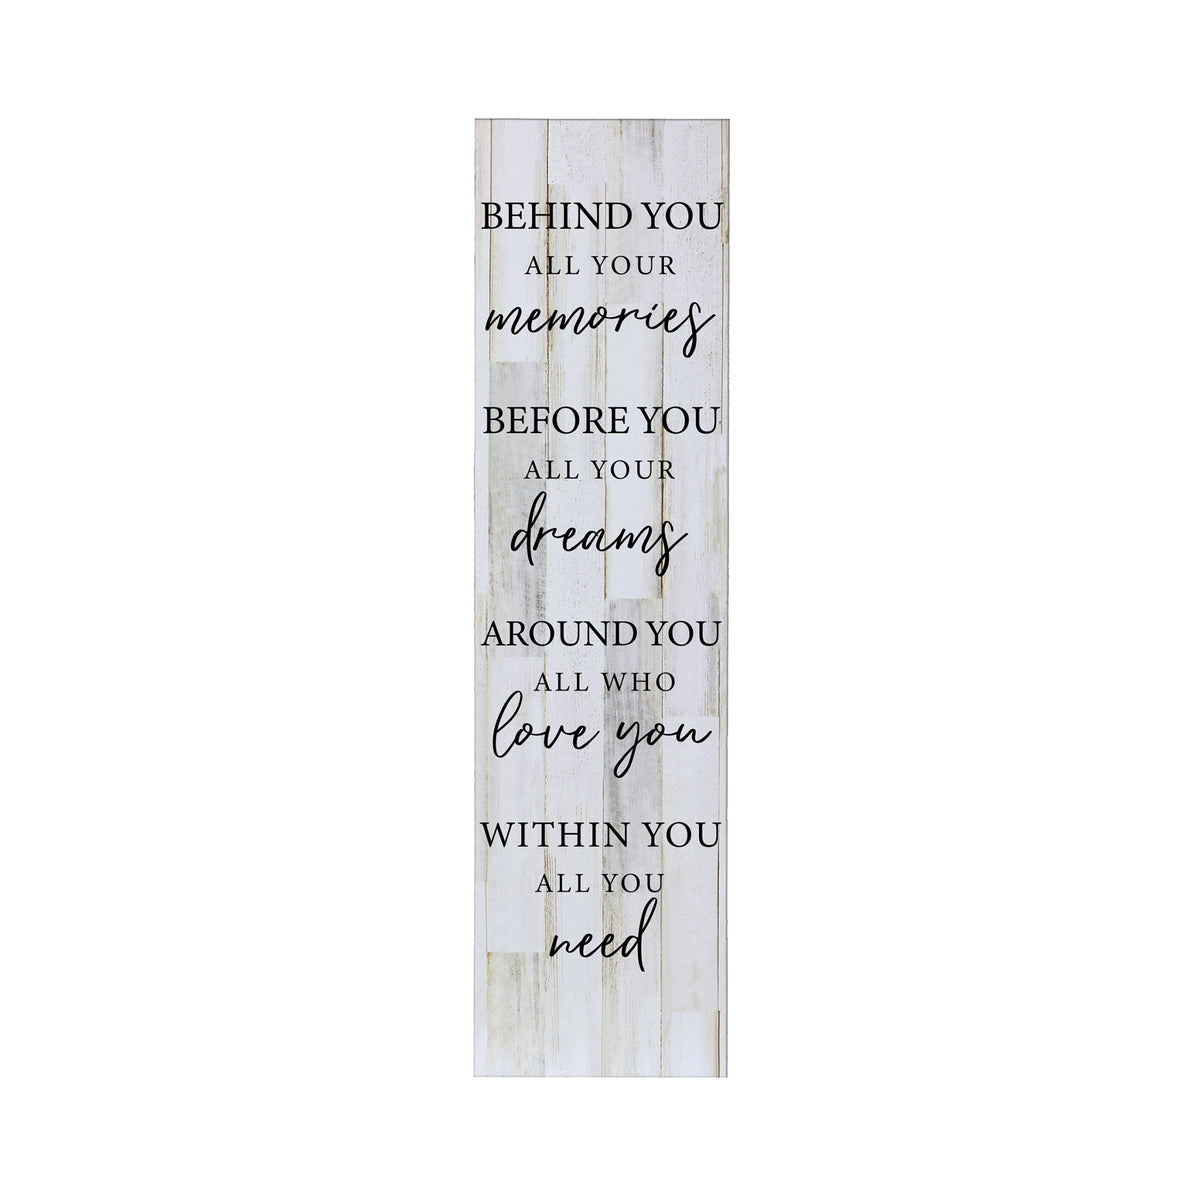 Inspirational Modern Wooden Wall Hanging Plaque 10x40 - Behind You All Your Memories - LifeSong Milestones